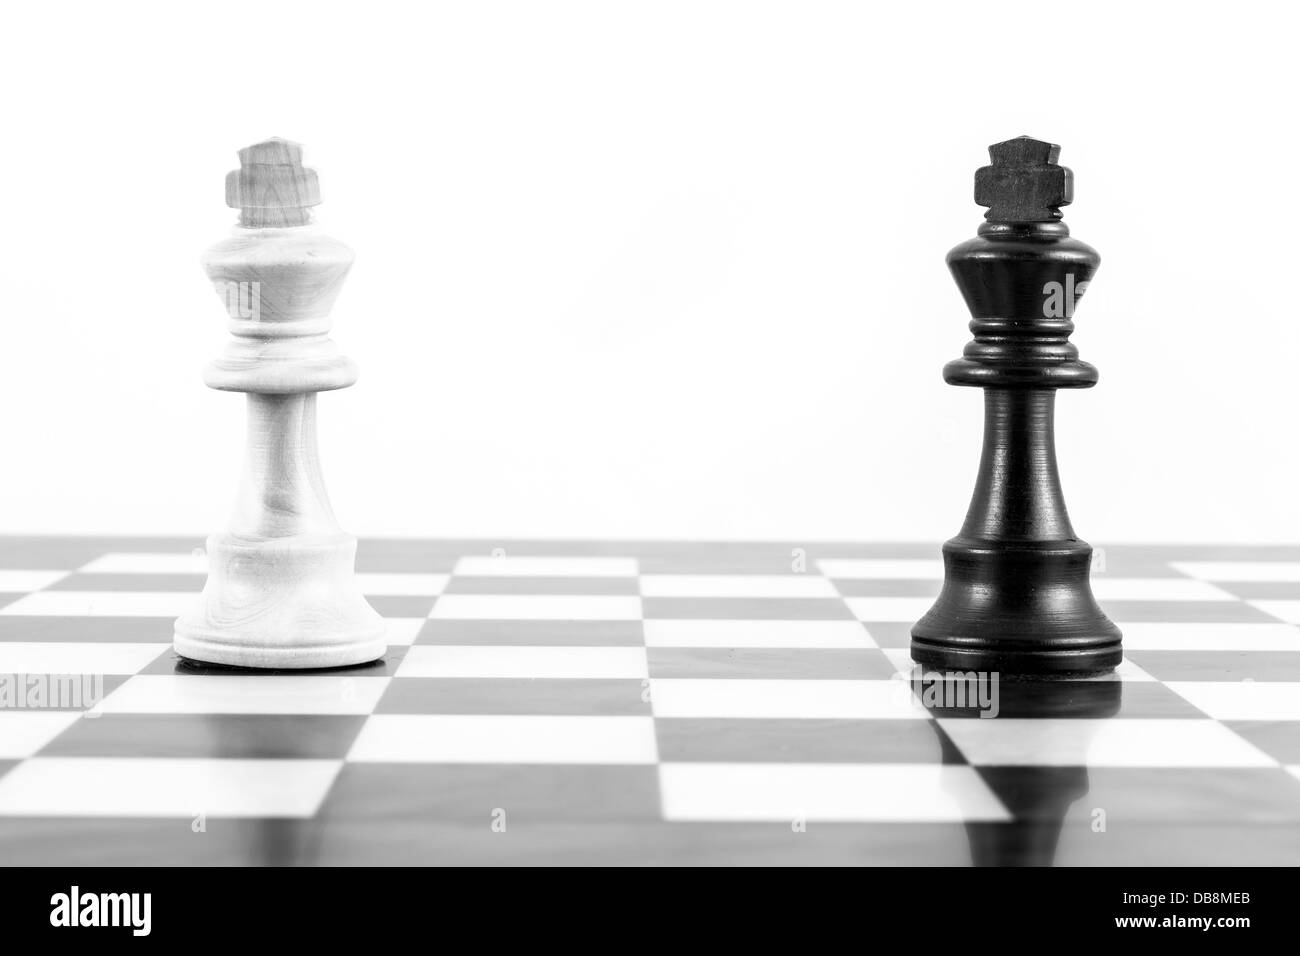 Concept For Challange With Elegant Stauton Style Chess Pieces Stock Photo Alamy